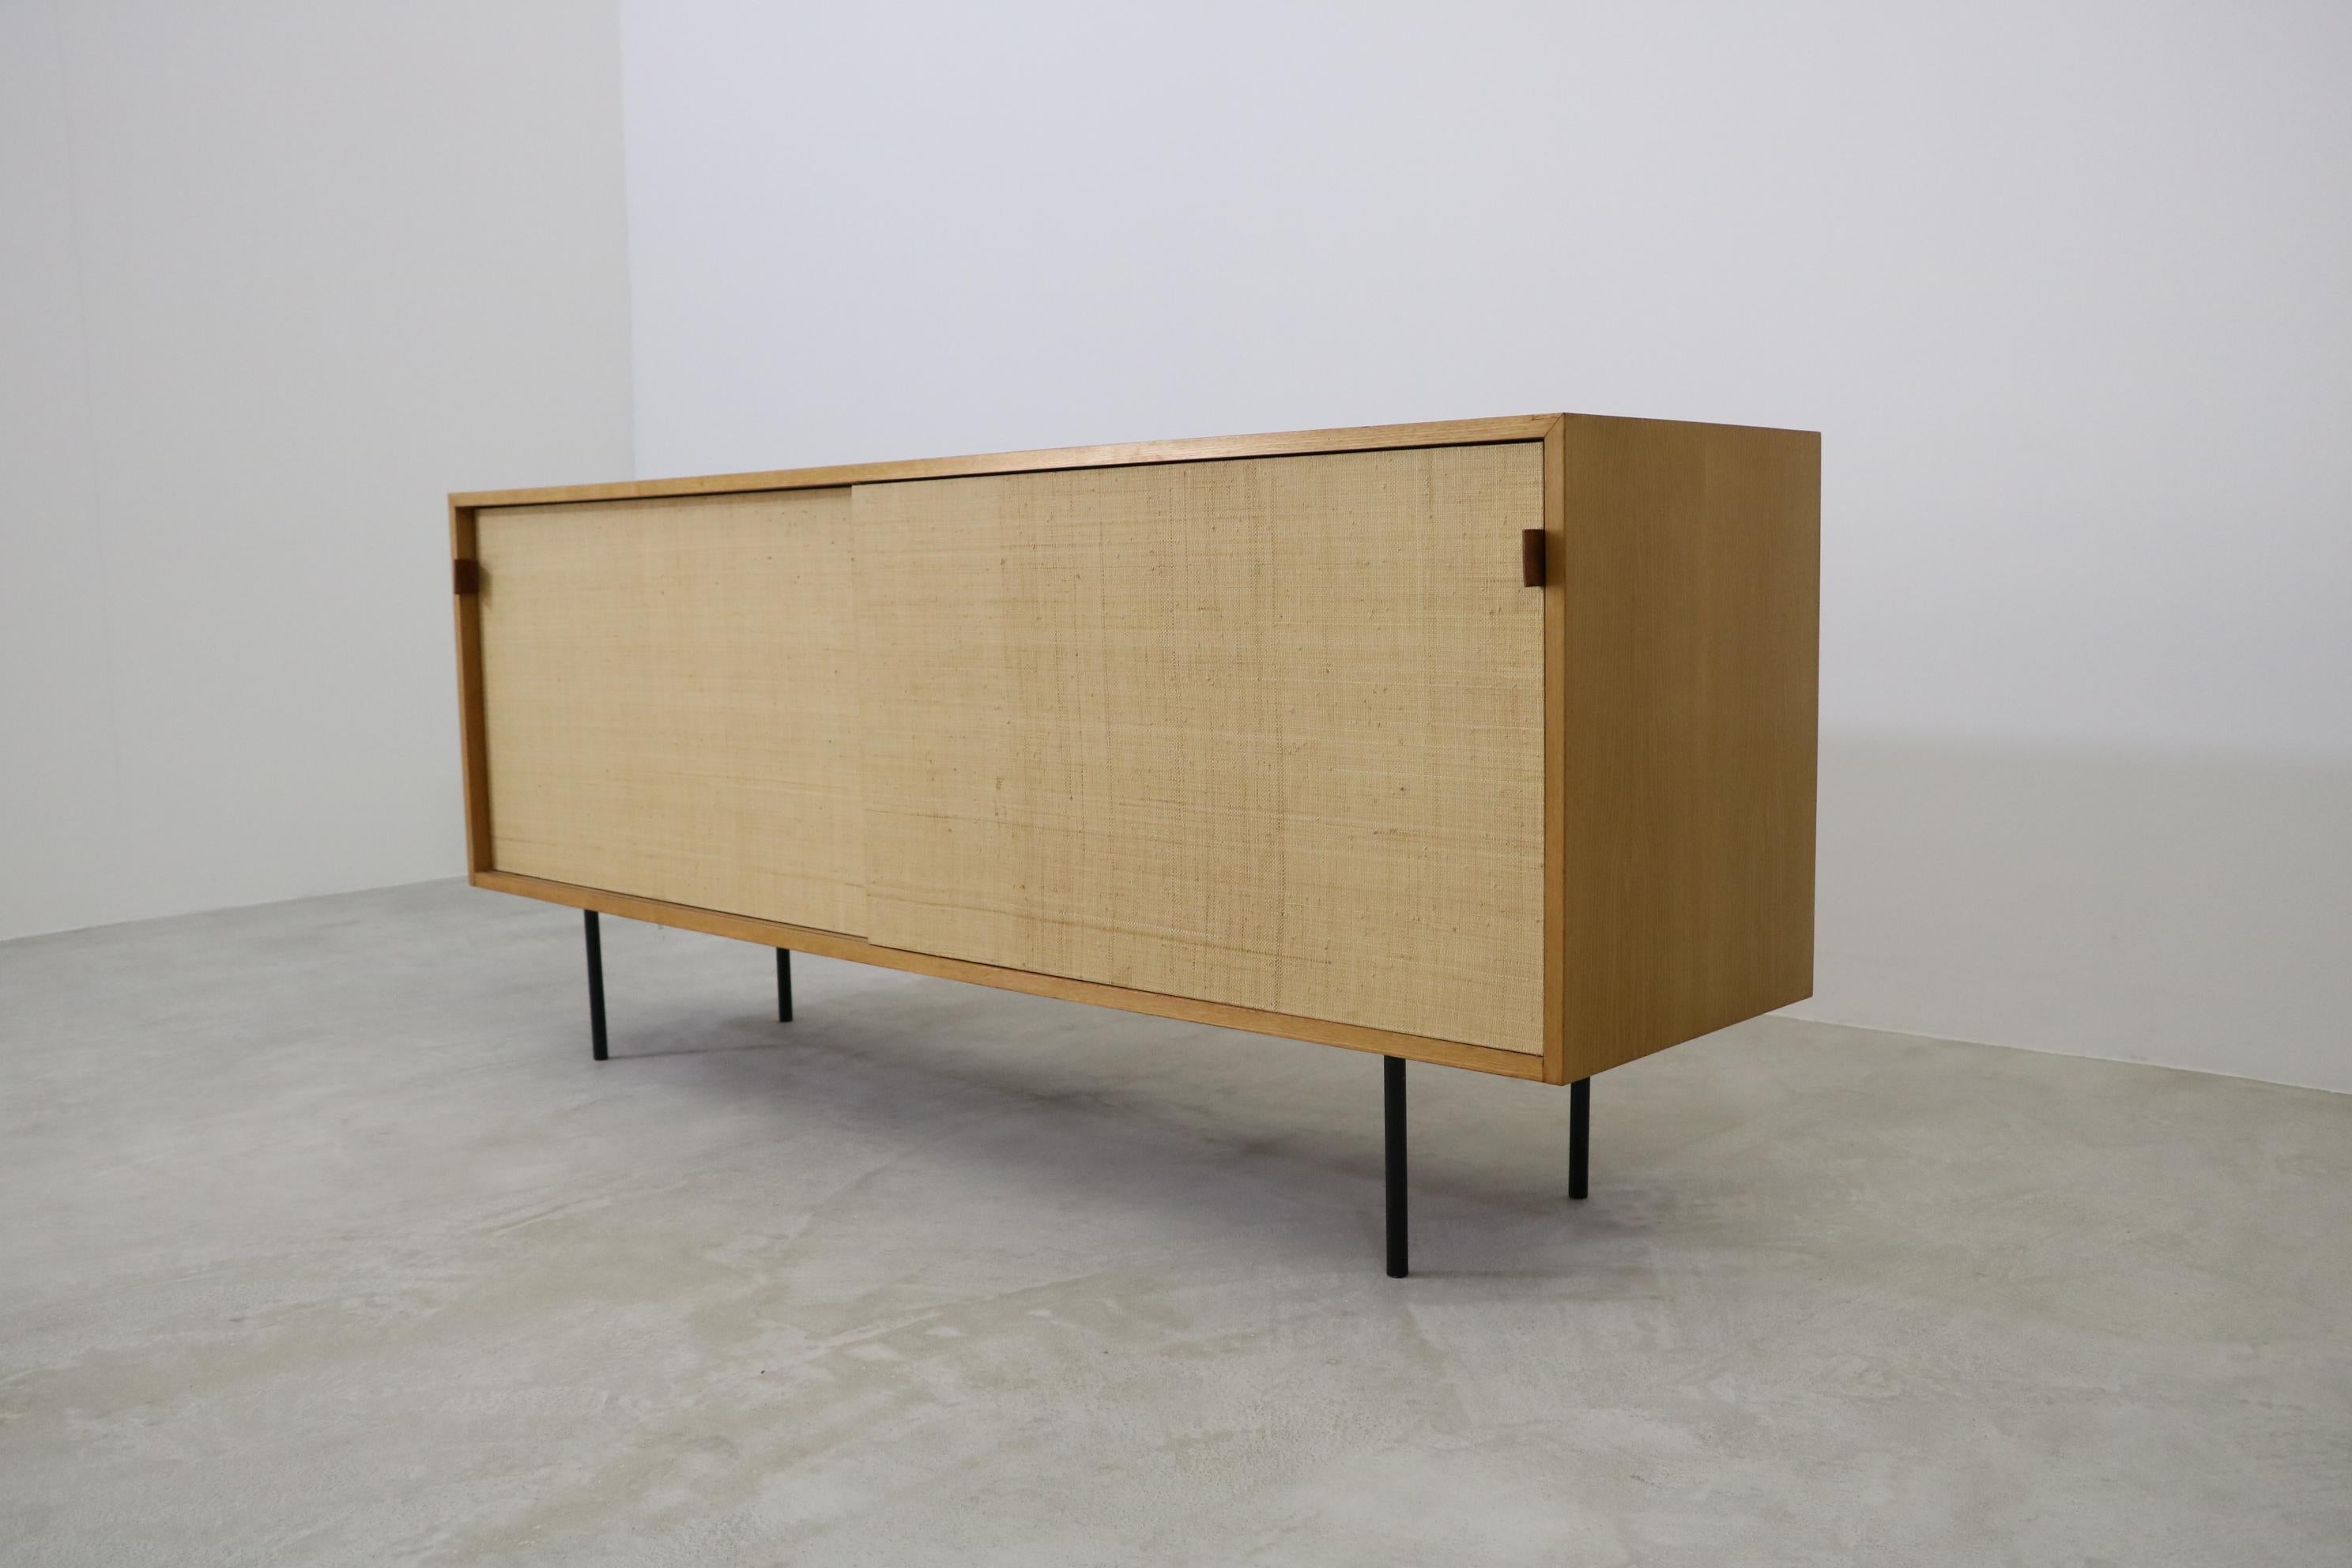 Sideboard credenza (Mod. 123) by Florence Knoll with sliding doors sea grass.
Produced by Knoll International, 1960s.
Frame steel lacquered black, body wood ash, sliding doors sea grass with leather handles.
The sideboard comes from first